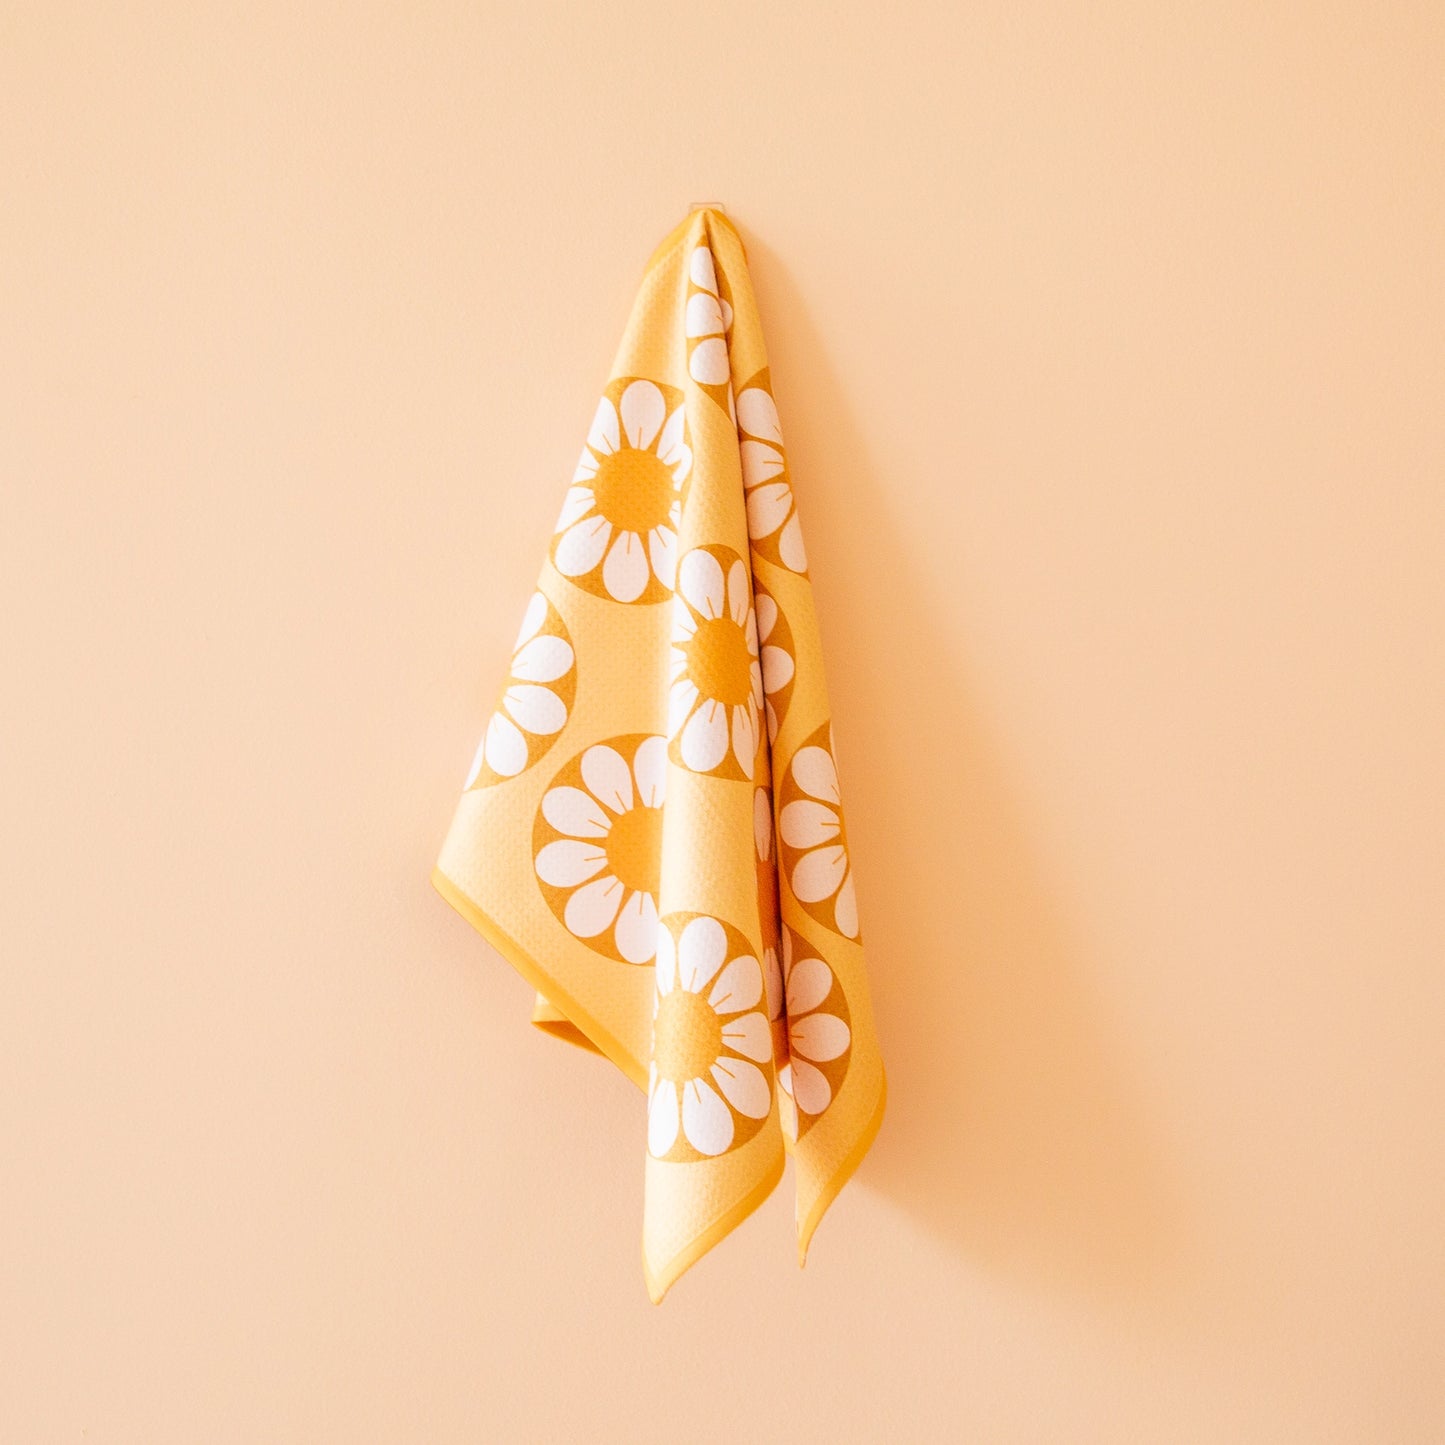 On a peachy background is a yellow and white daisy kitchen towel with a waffle texture and hung up on a hook.